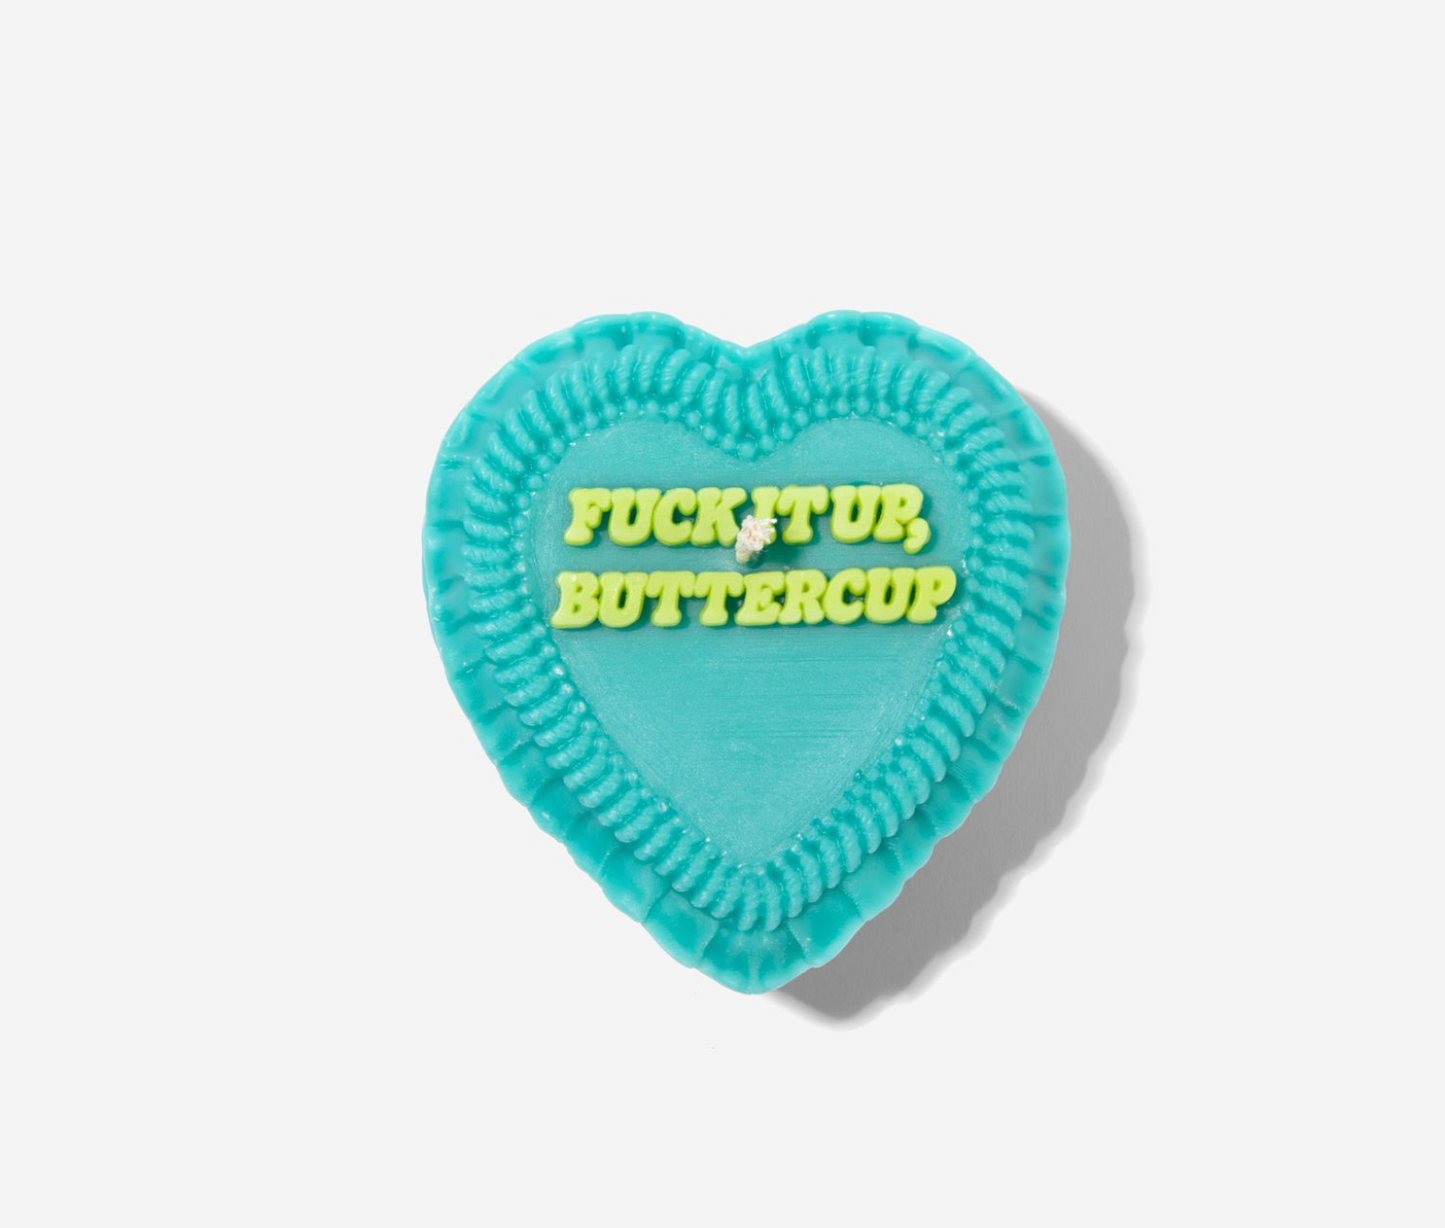 Fuck It Up Buttercup Vintage Heart-Shaped Cake Soy Candle - 13.5 Ounces